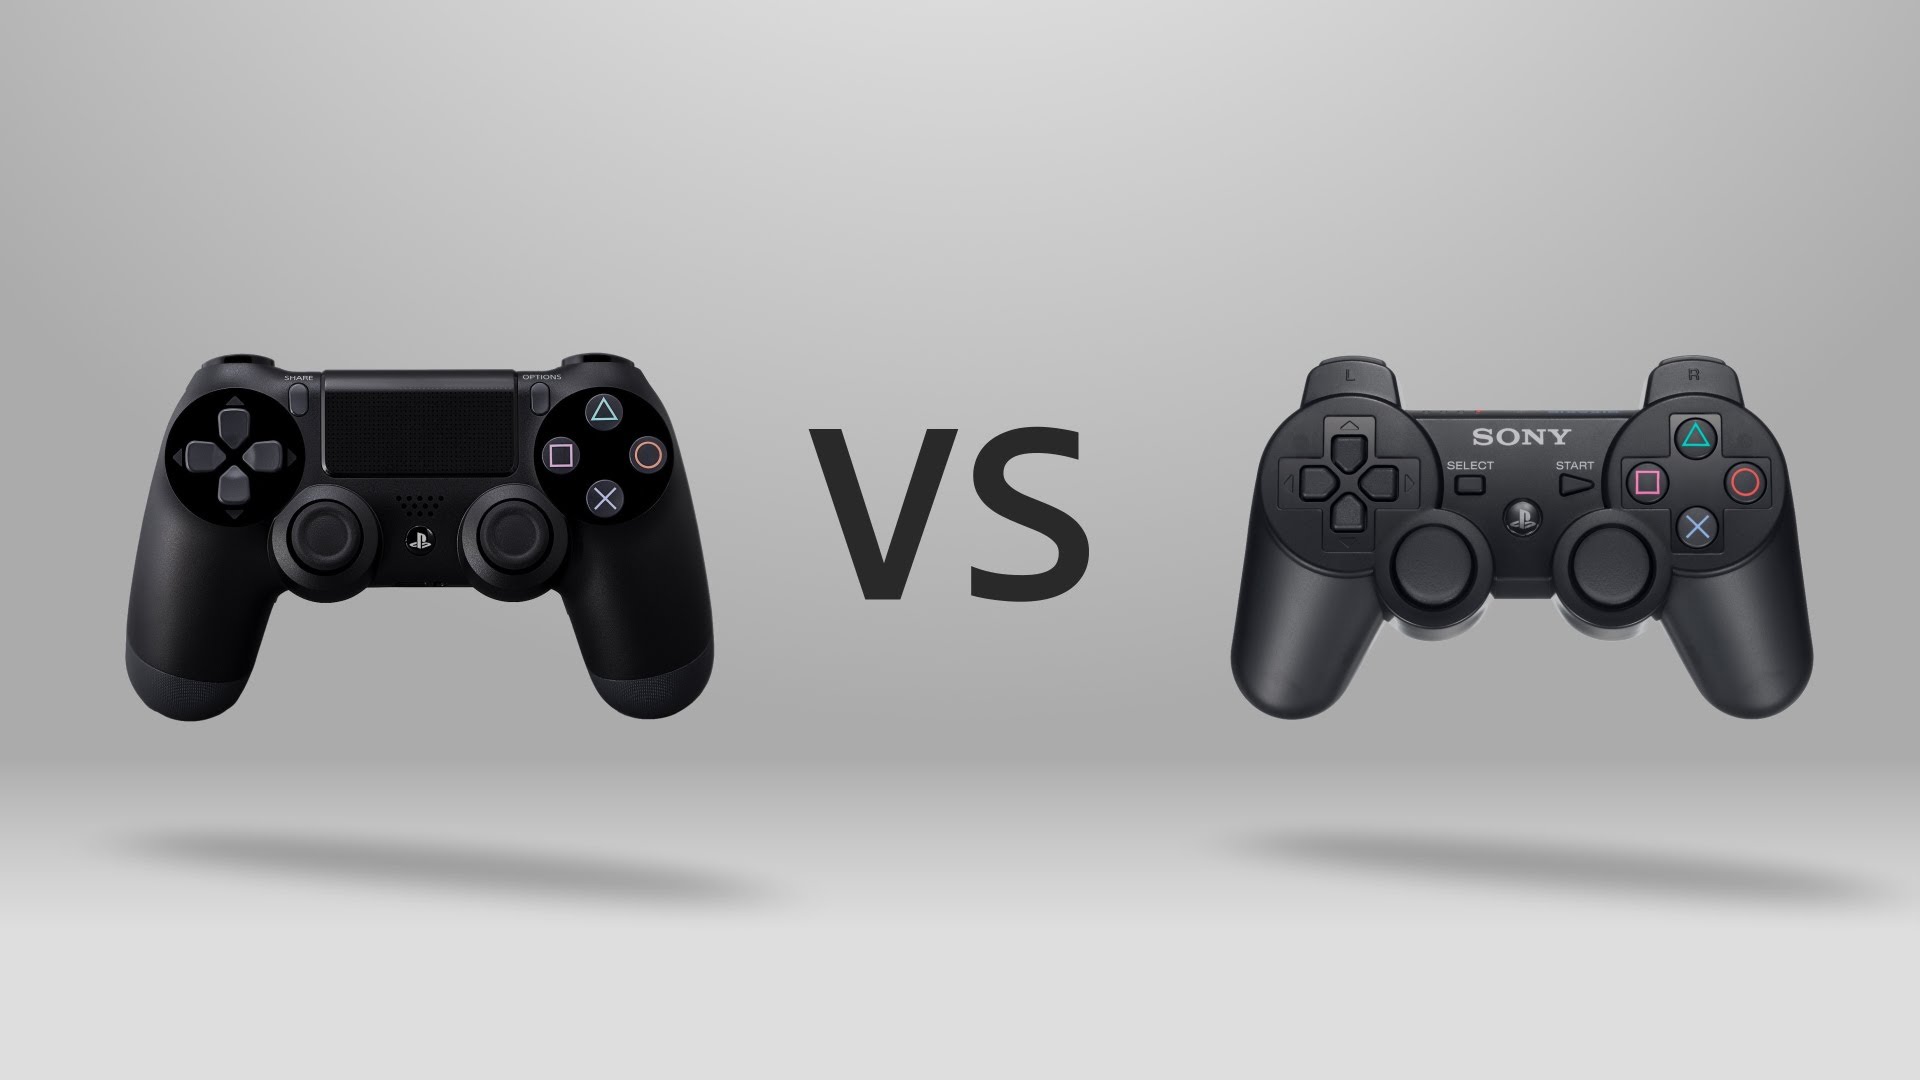 Transitioning between generations: ps3 to ps4